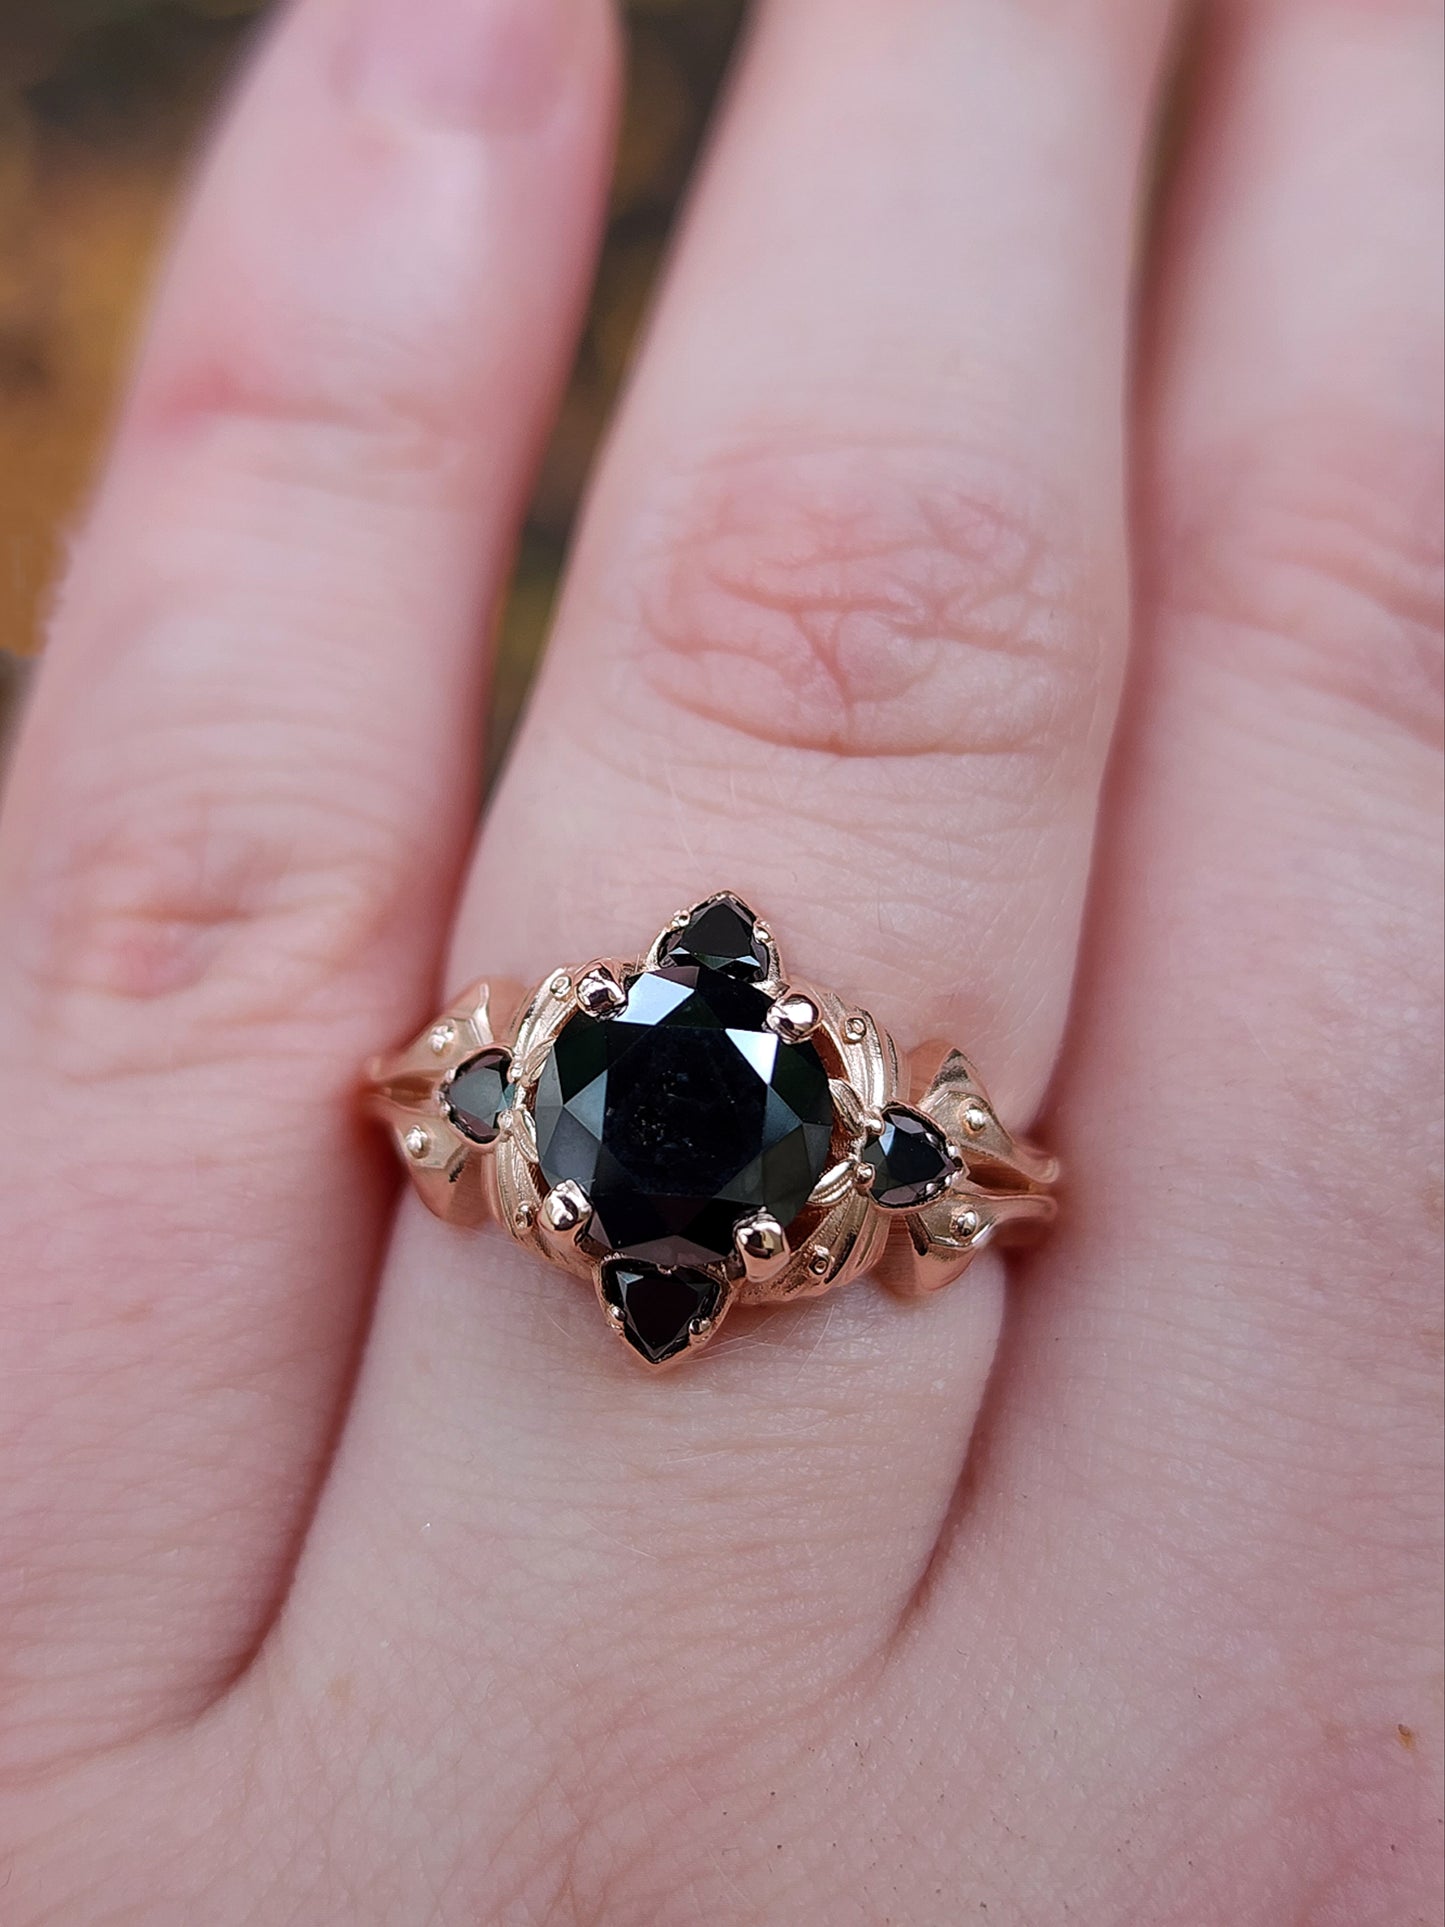 Load image into Gallery viewer, Luna Goth Moth Engagement Ring with Black Diamonds - Bug Wedding Ring Nature Inspired Fine Jewelry
